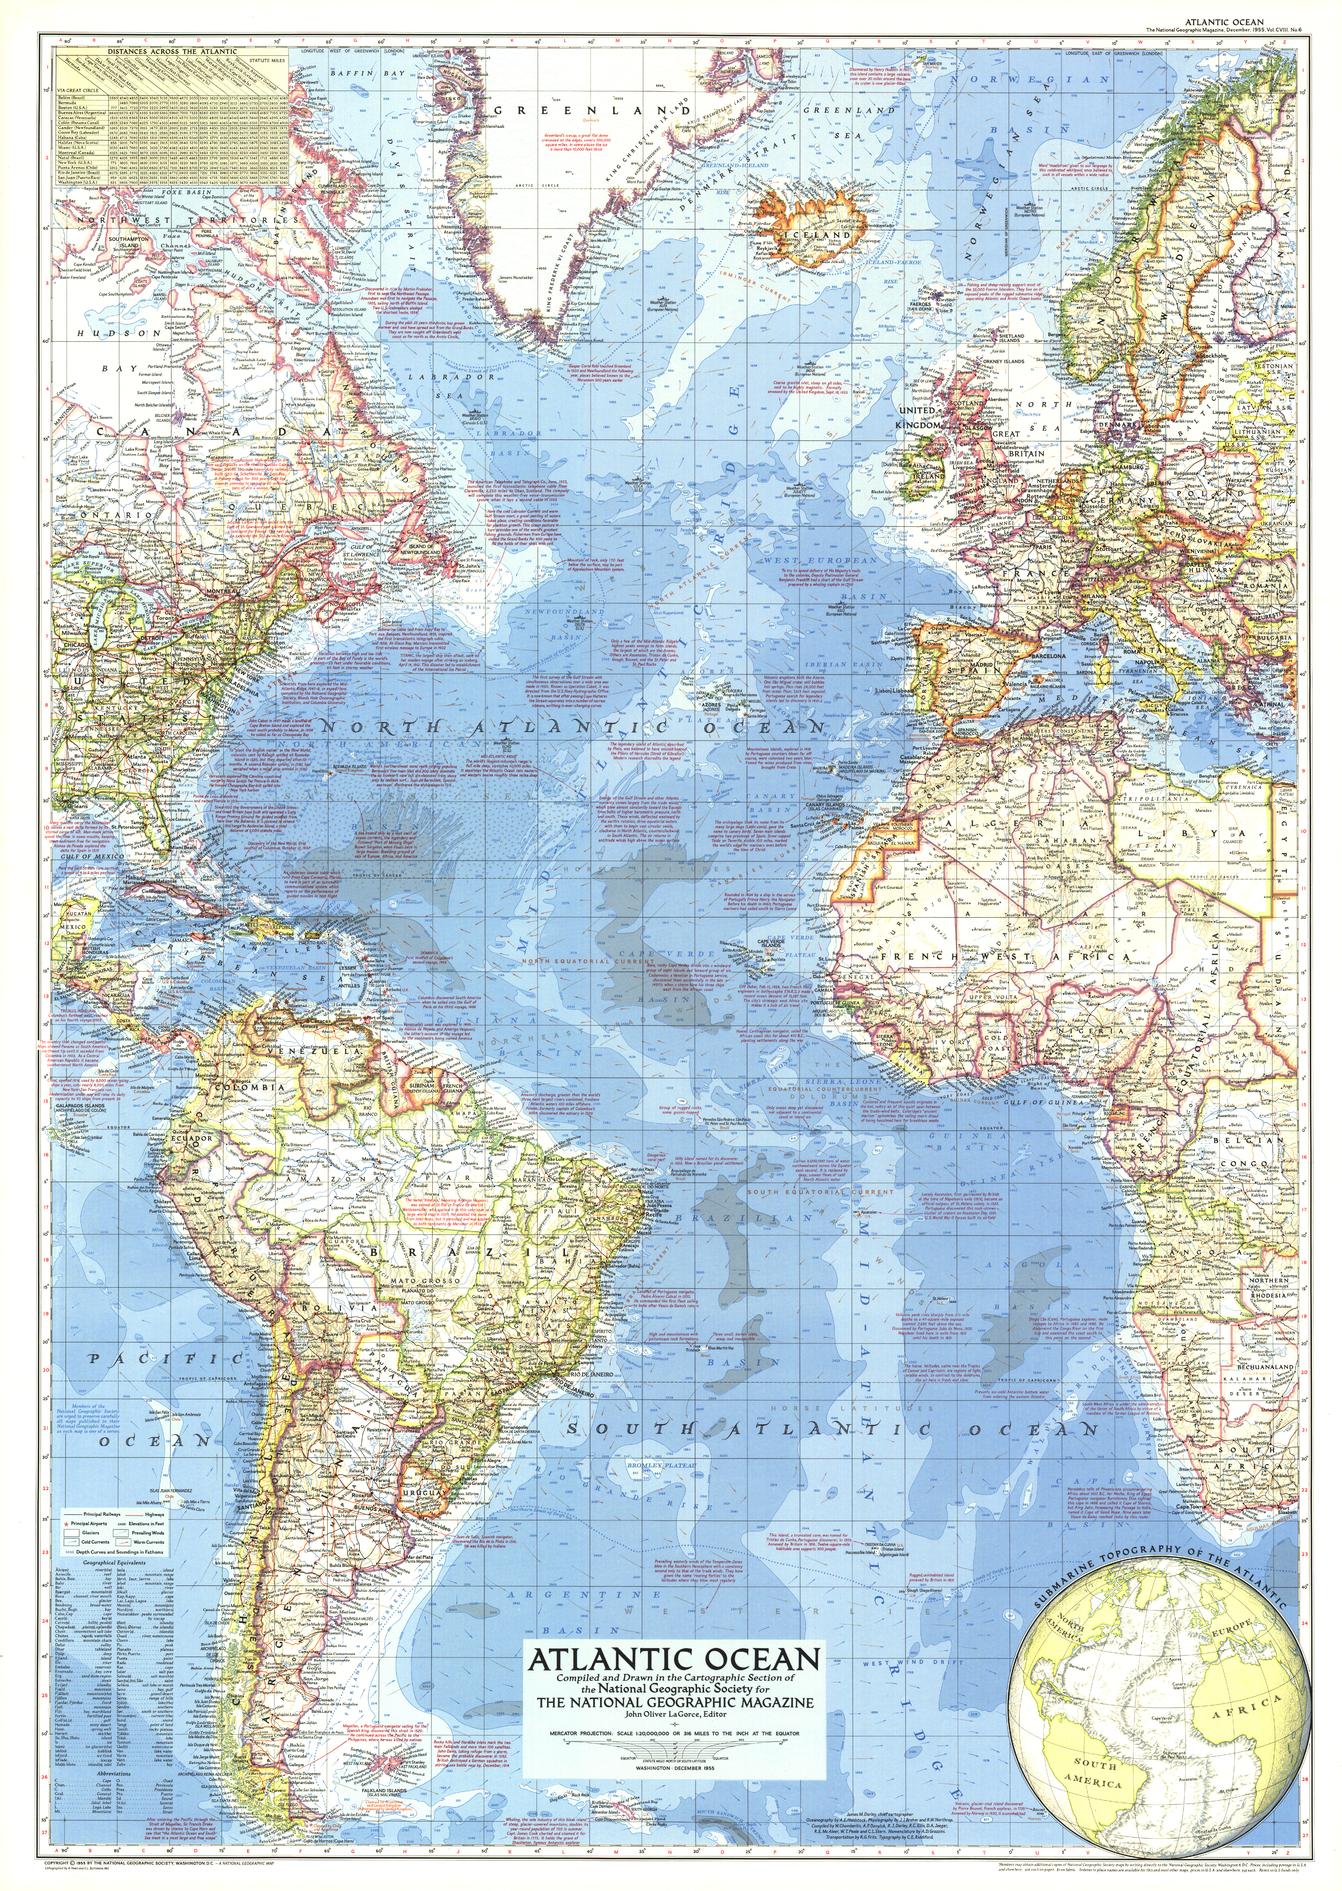 atlantic-ocean-map-published-1955-national-geographic-maps